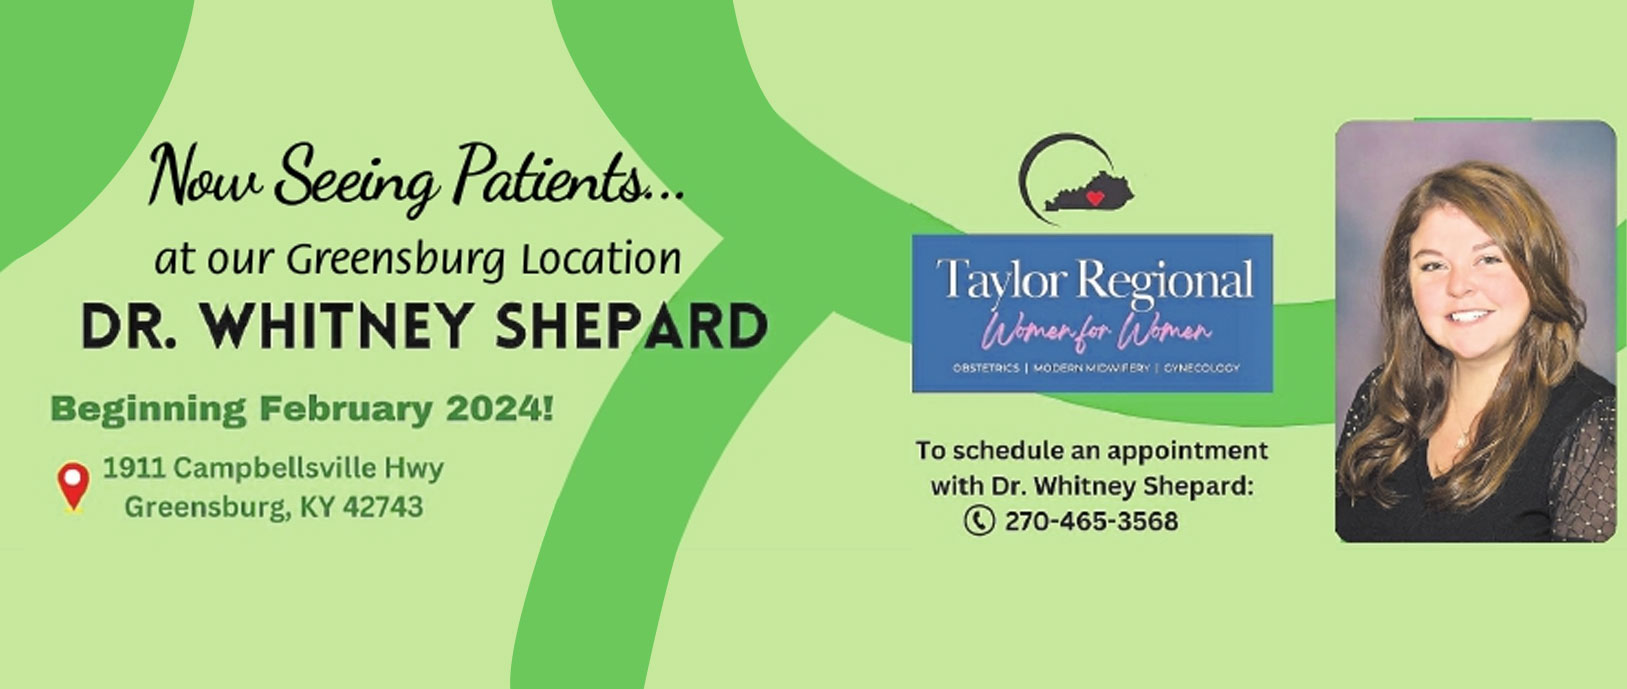 Now Seeing Patients... at our Greensburg Location
Dr. Whitney Shepard

Beginning February 2024!

1911 Campbellsville Hwy Greensburg, KY 42743

To schedule an appointment with Dr. Whitney Shepard: 270-465-3568